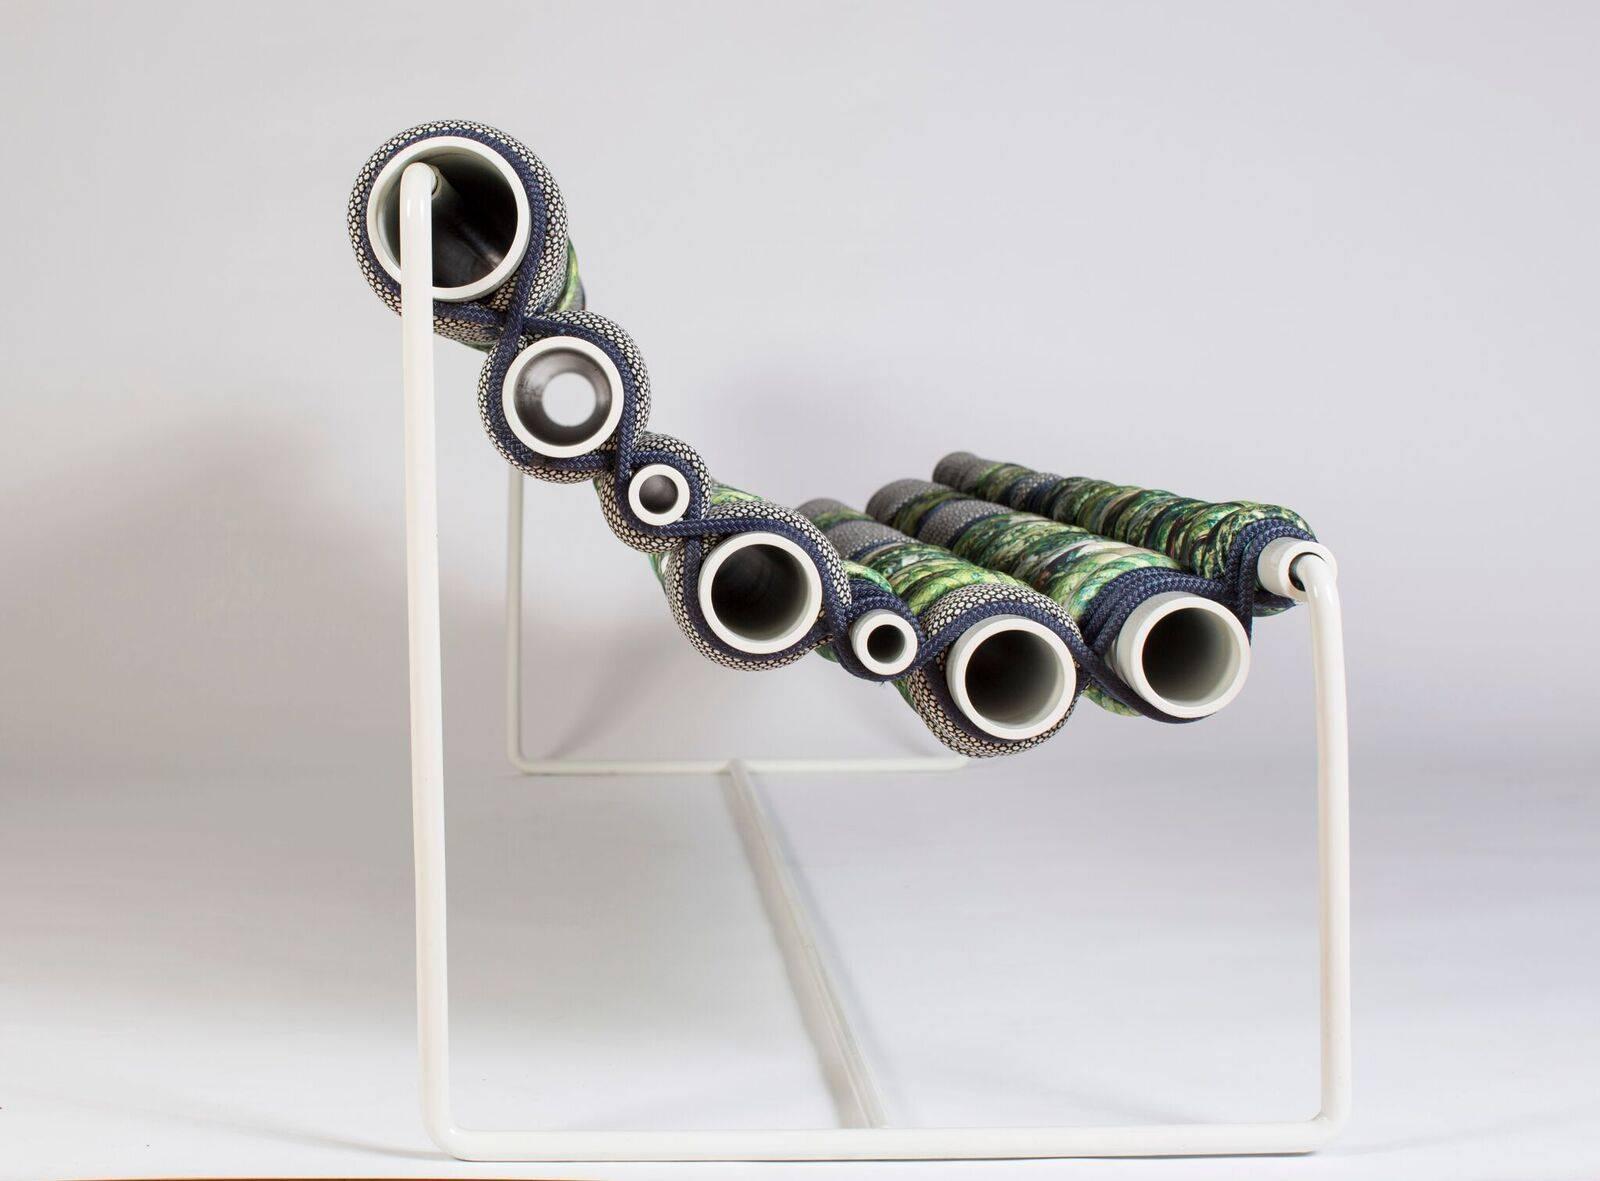 This Betil Dagdelen alloy bench is made with powder-coated aluminum pipes, steel, marine rope and upholstery fabric in 2016. 

Betil Dagdelen was born in Izmir, Turkey in 1978. She studied political science and international relations at Koç